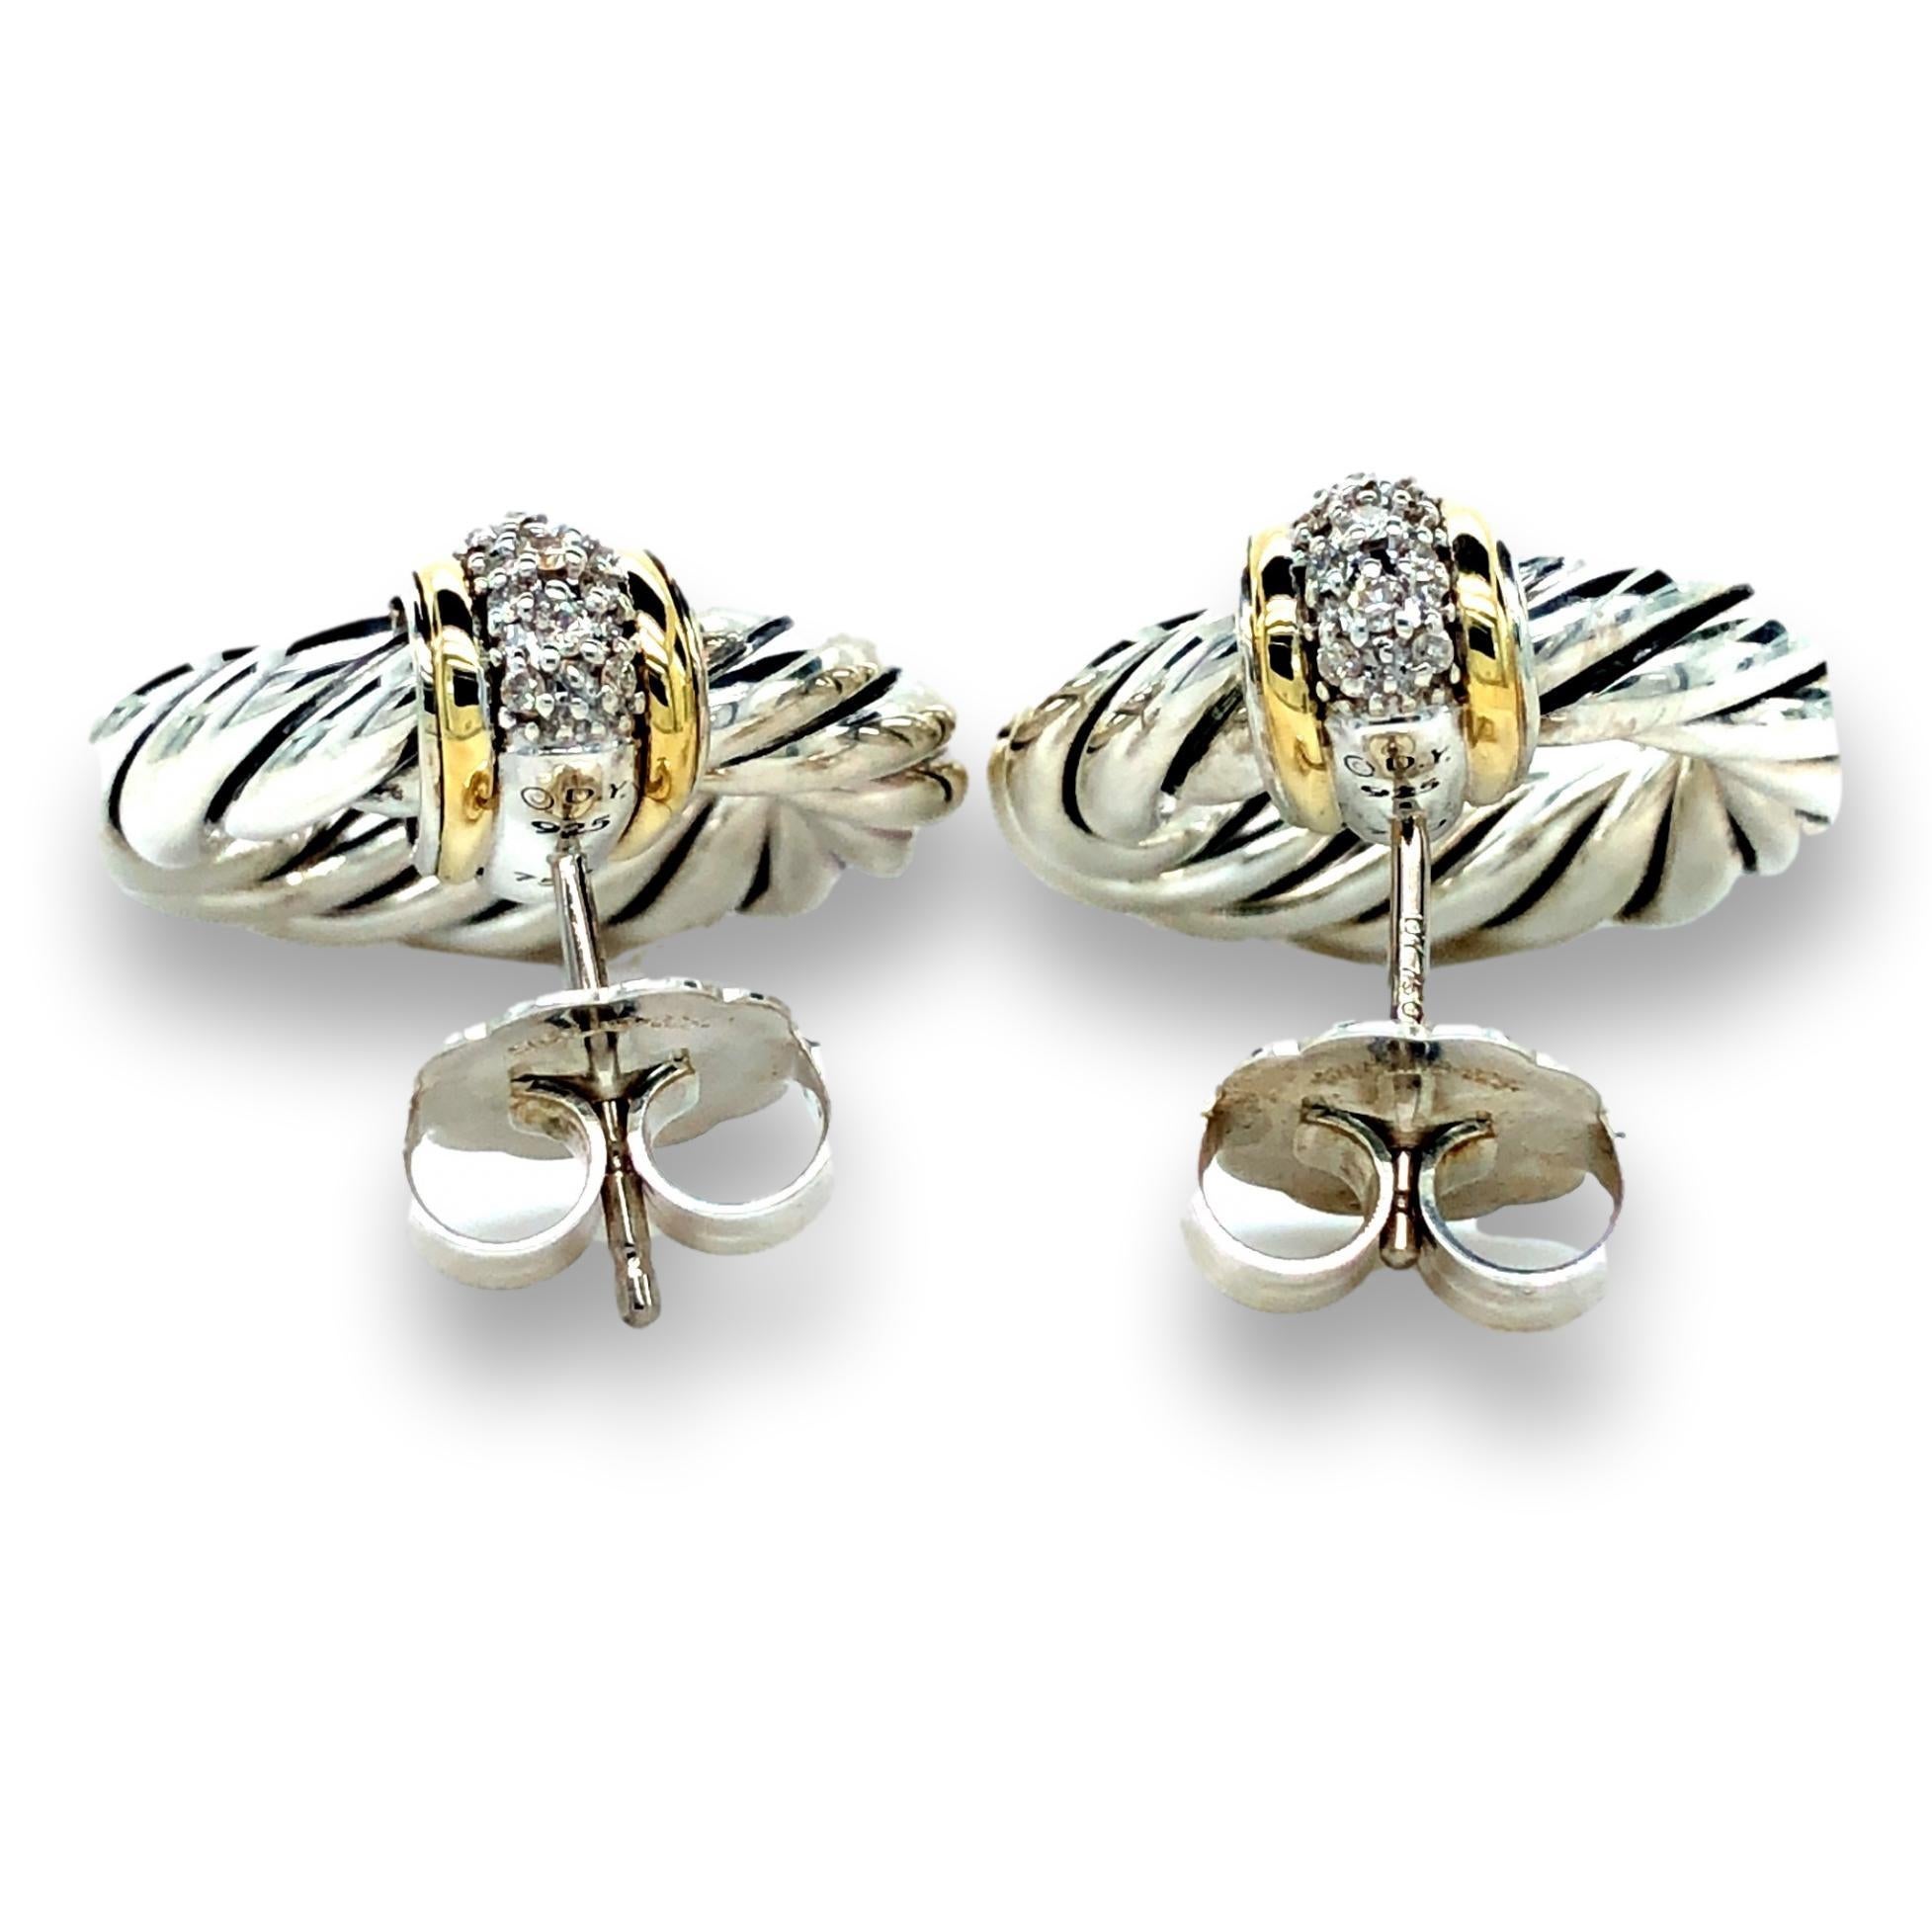 David Yurman pair of door knocker earrings finely crafted in blackened sterling silver featuring pavé set round brilliant diamonds weighing .28 carats total weight approximately in 18K yellow gold accents and posts with jumbo back closures in a